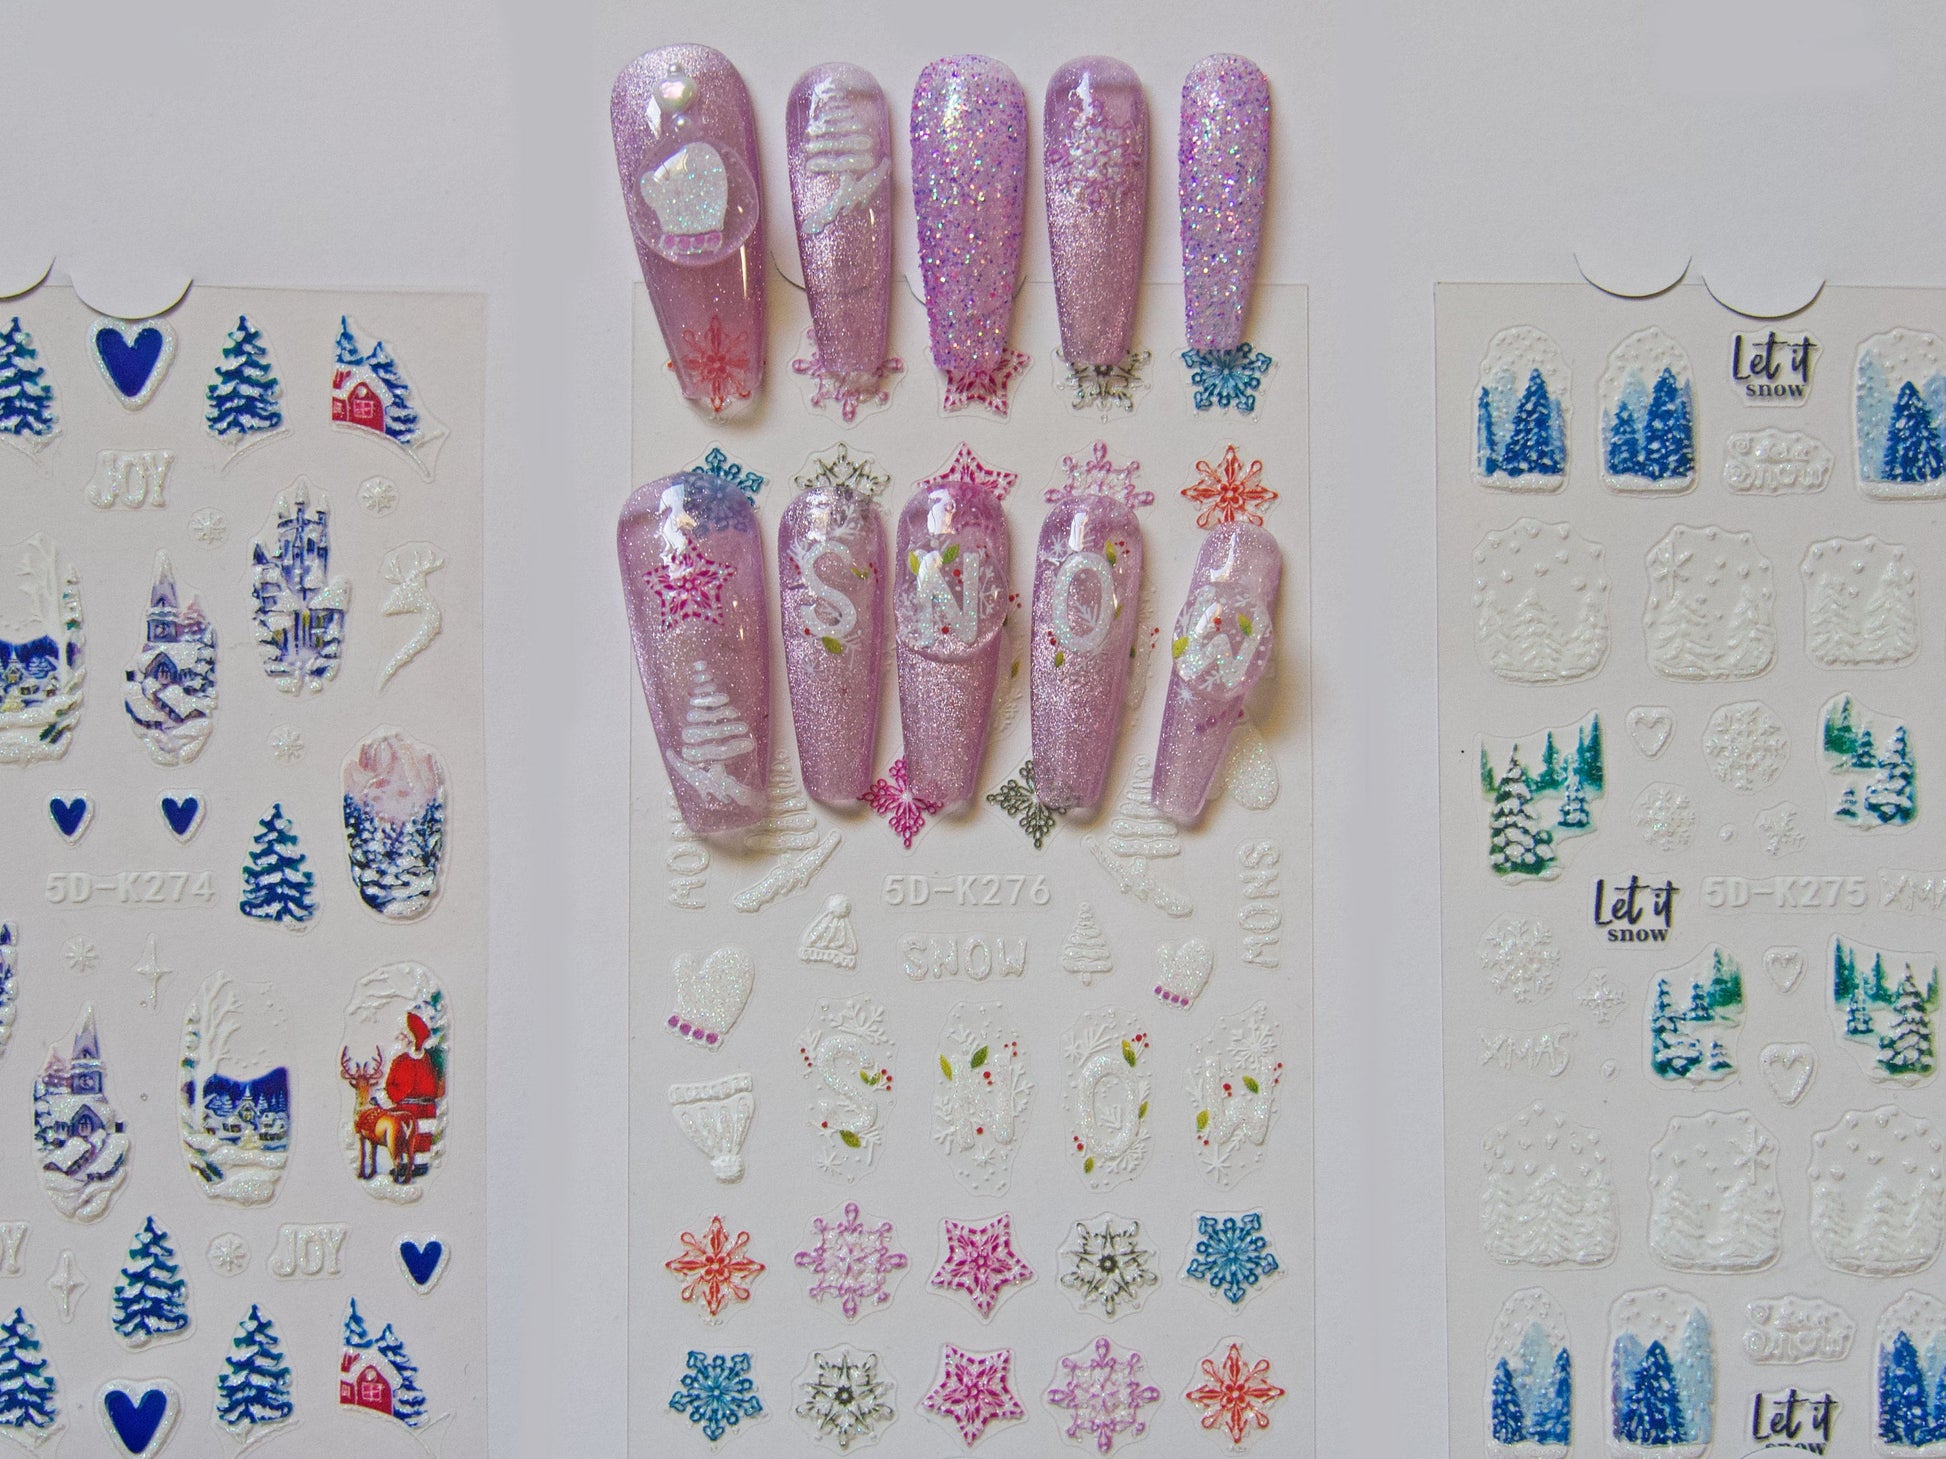 Shiny Glittery Winter Holiday Nail Art Stickers Decals/ Christmas 3D Textured Snow-Covered Cottages Sticker/ Wonderland New Year nail Decals